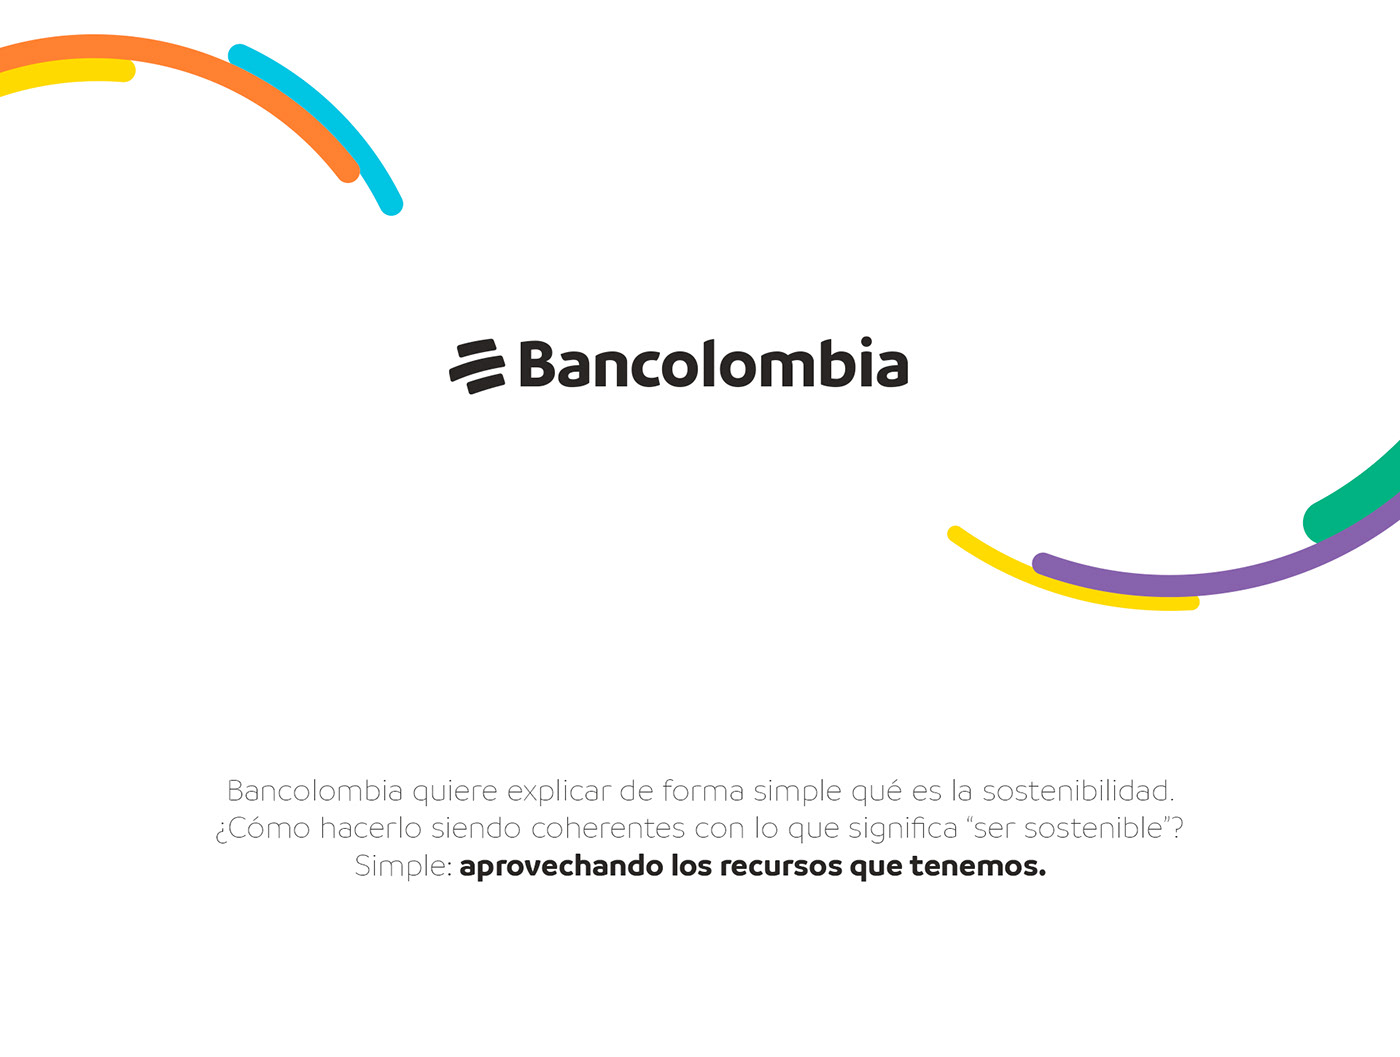 Advertising  bancolombia Cannes colombia Film   Lions Shortlist winner Young Young lions